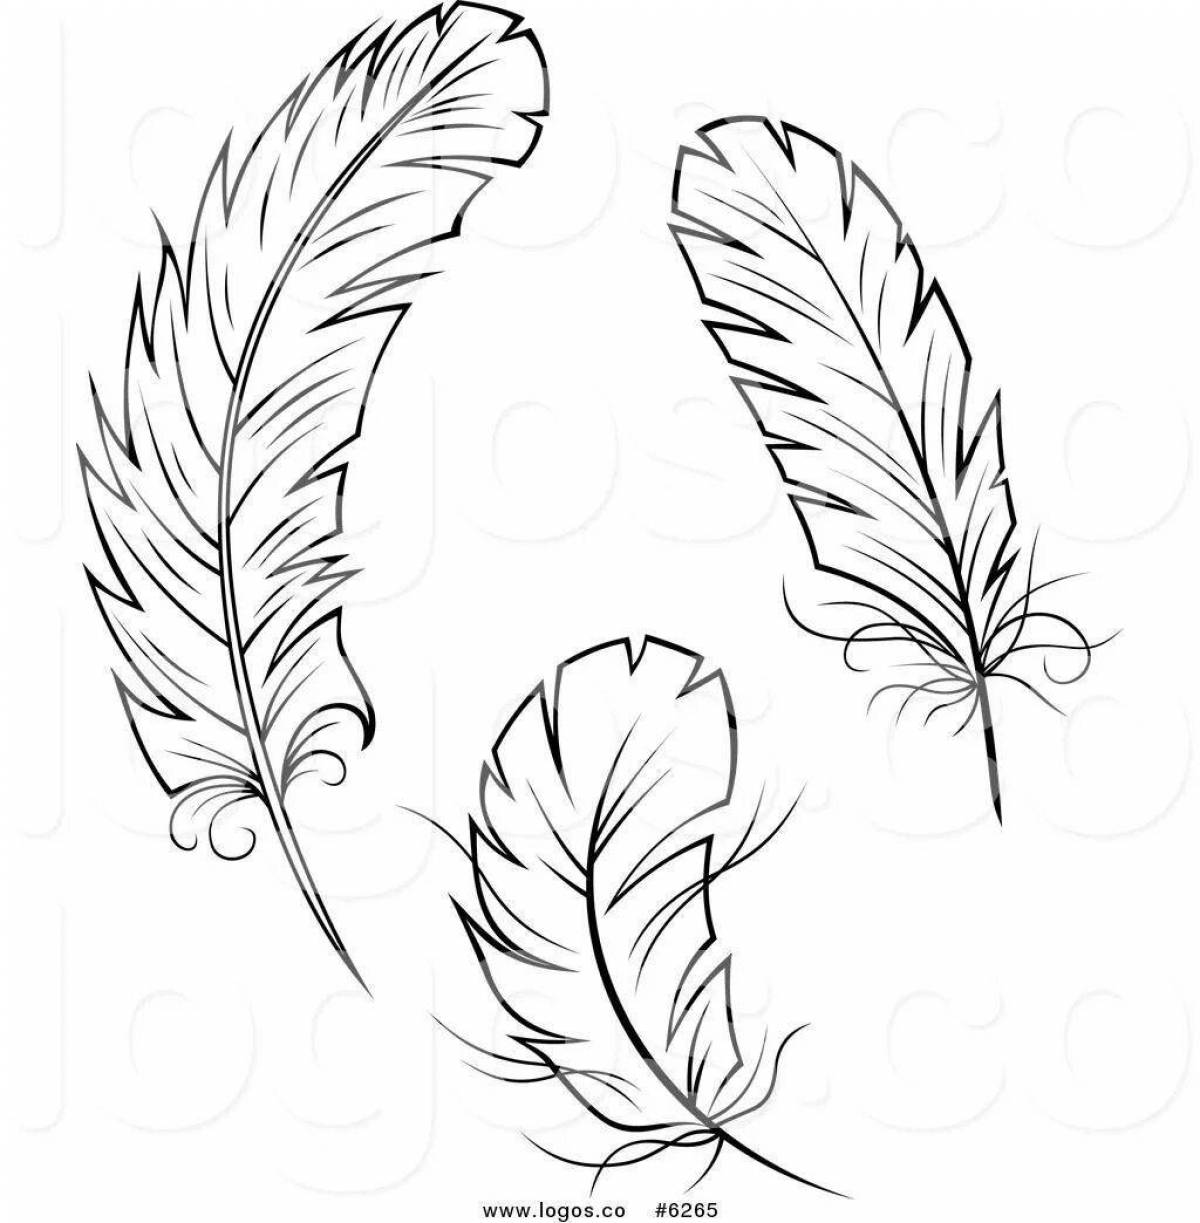 Coloring page with bold feather pattern